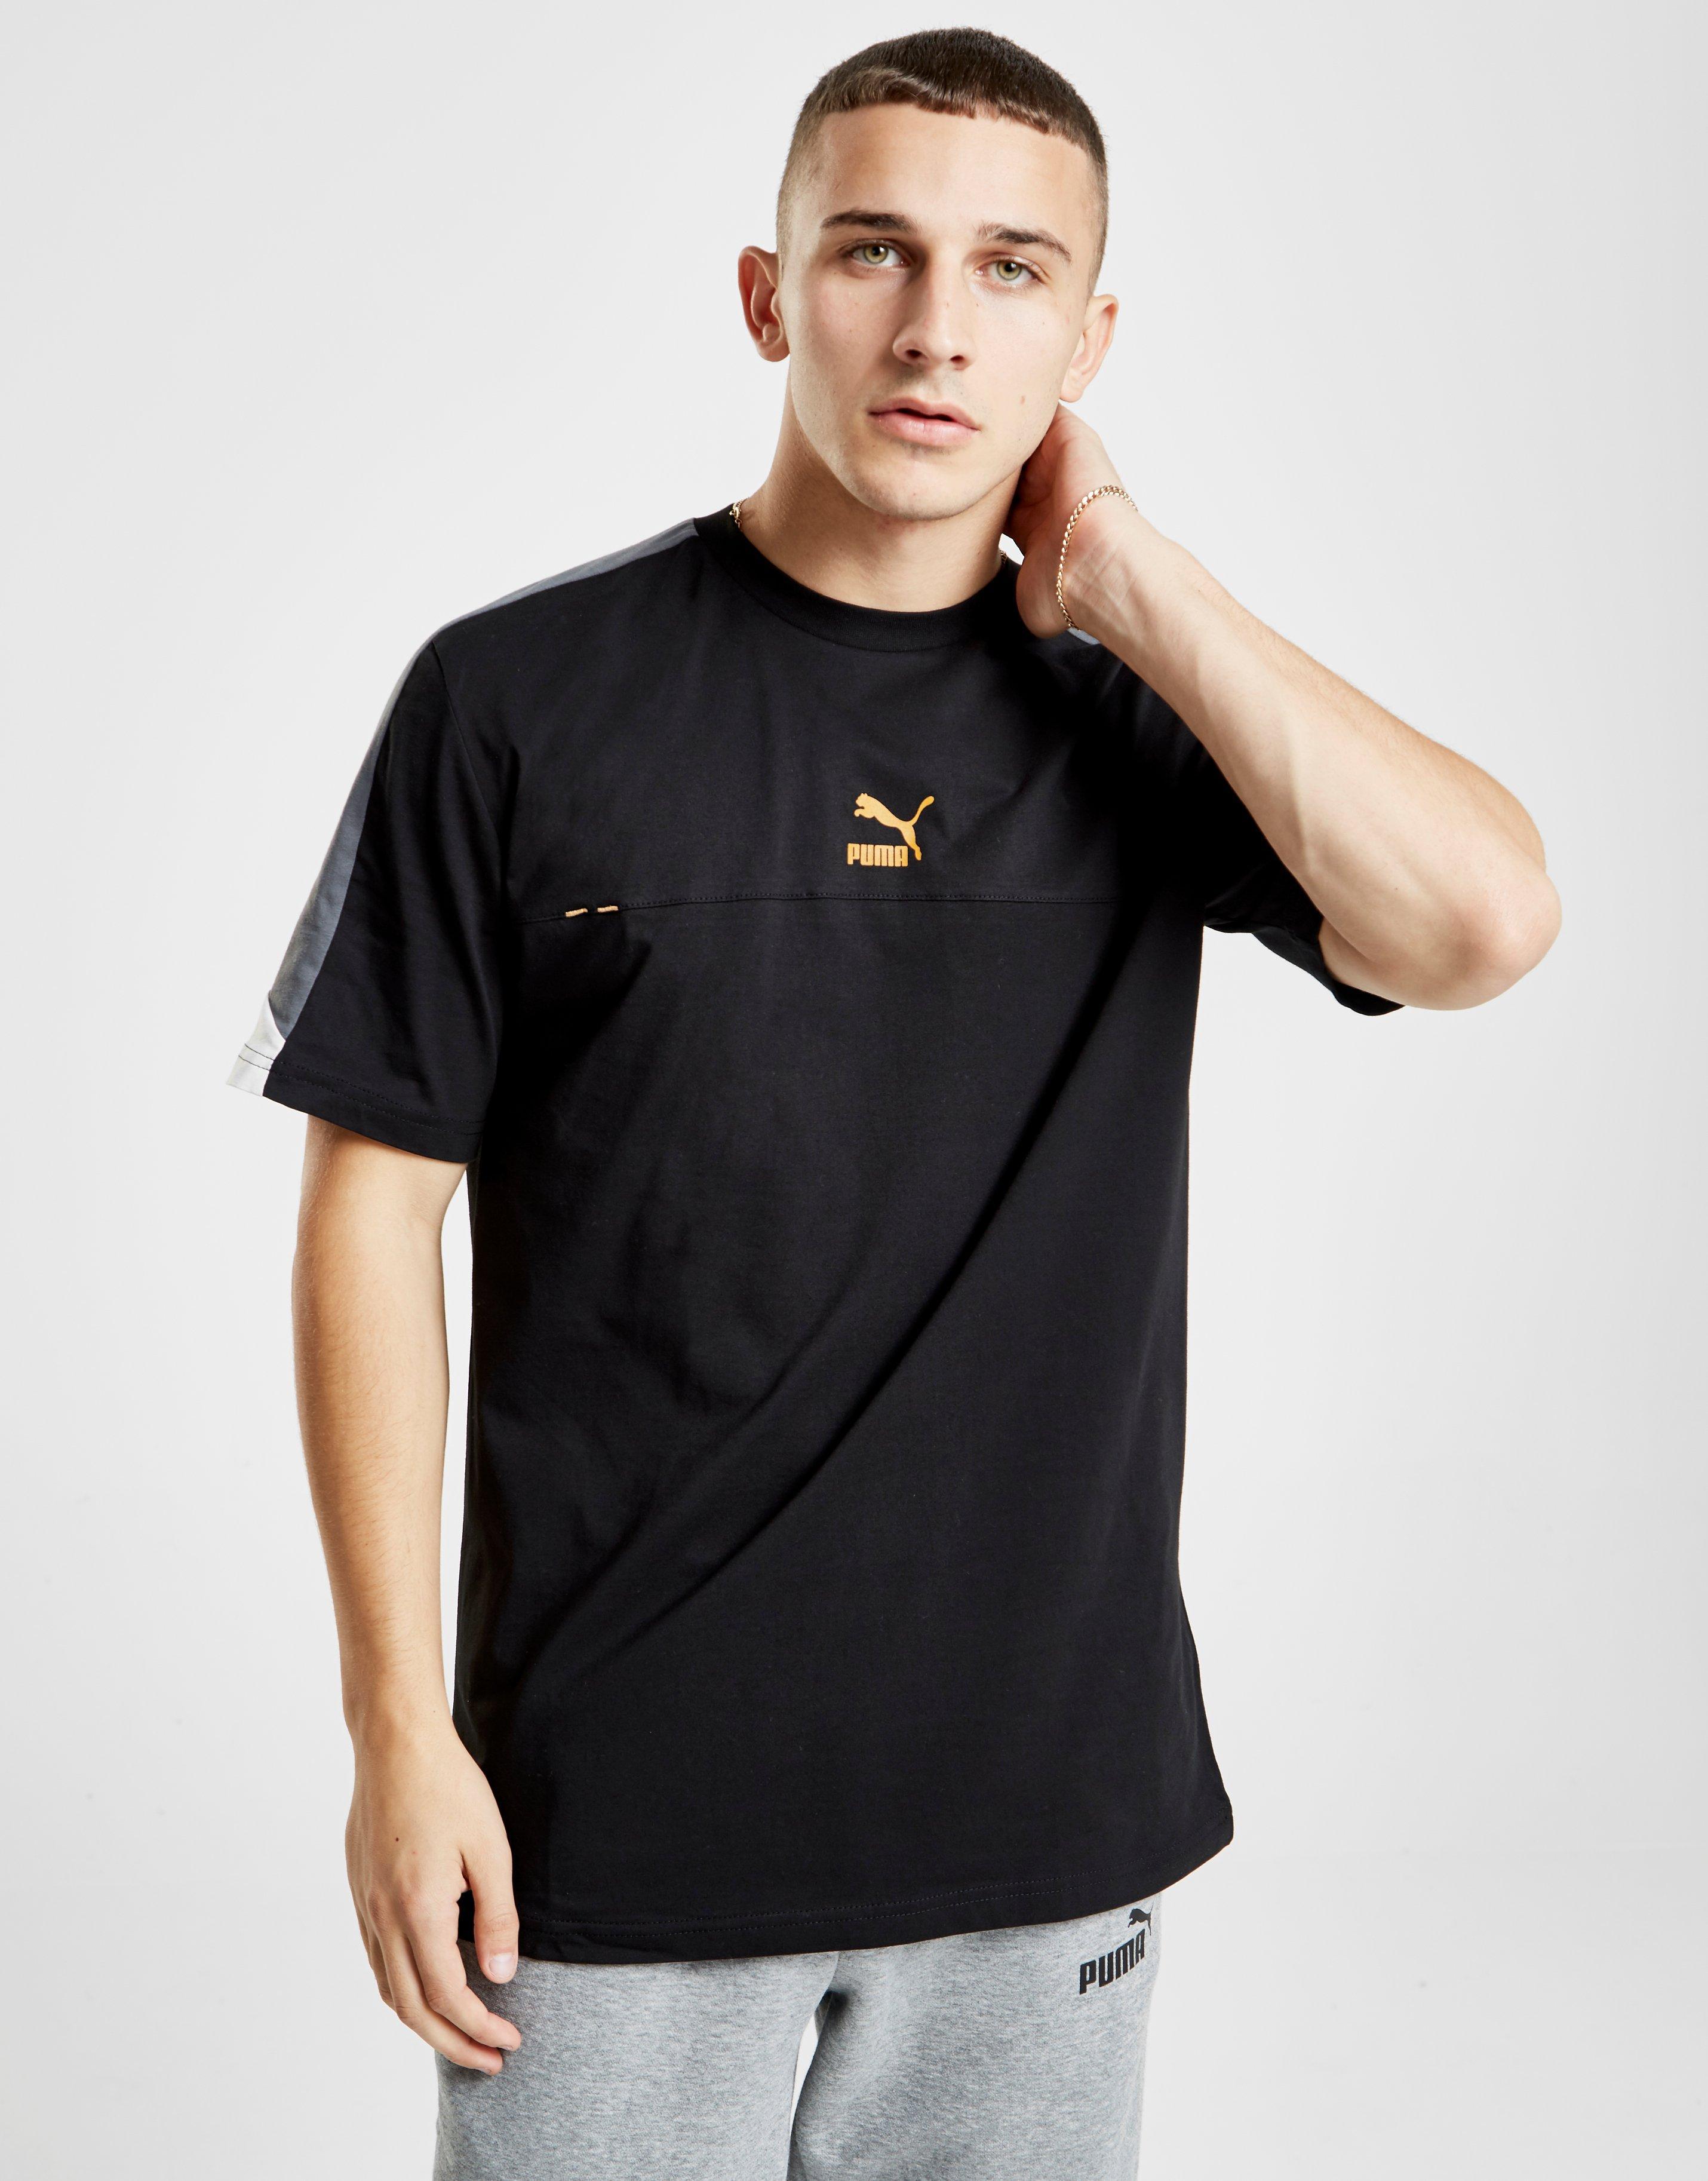 PUMA Cotton Rs T-shirt in Black/Yellow 